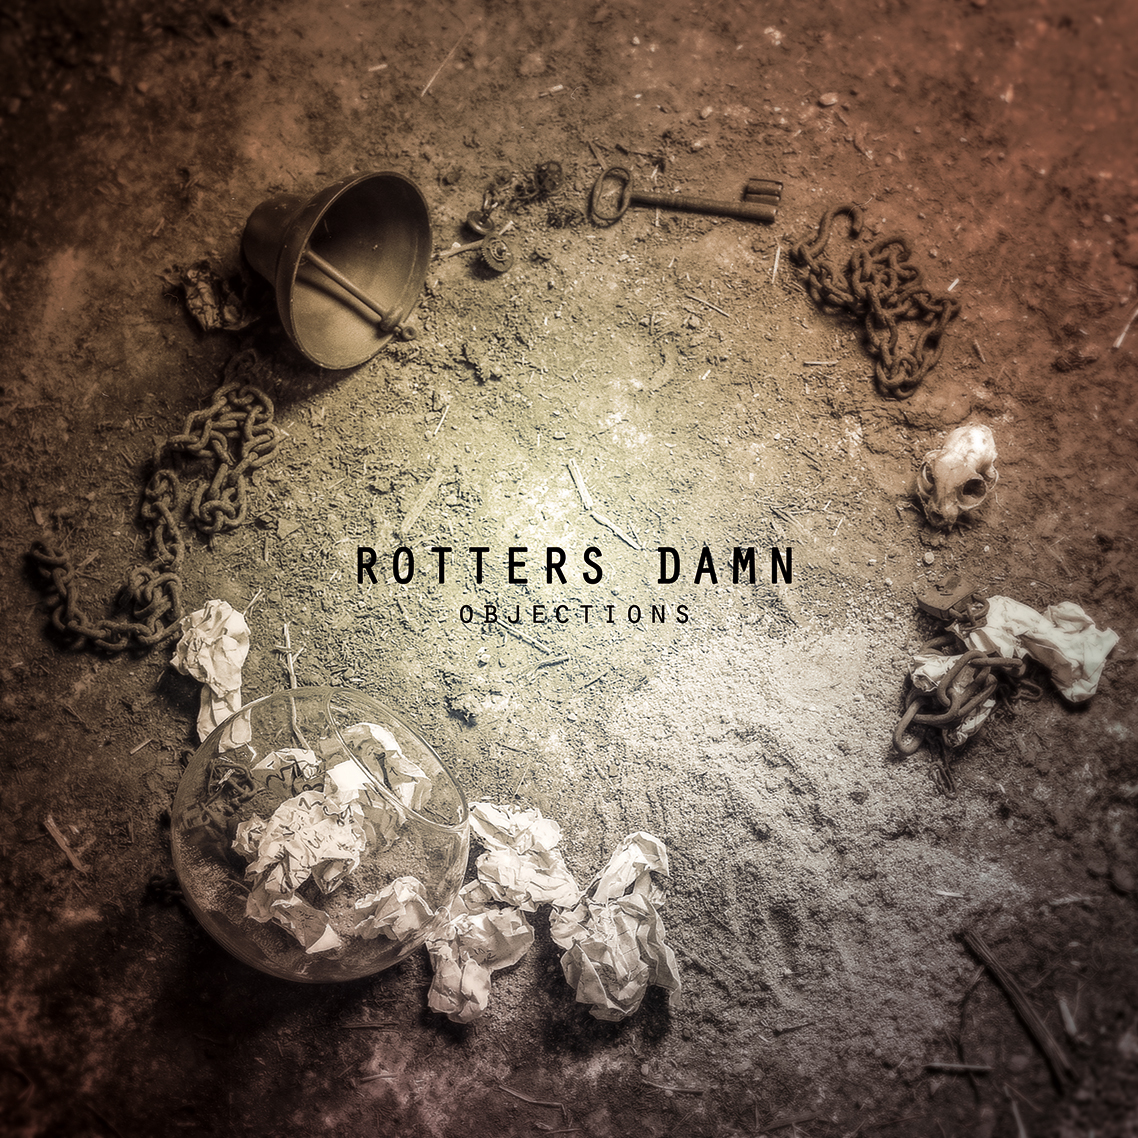 Album ep band rotters damn Cover Art Photography 